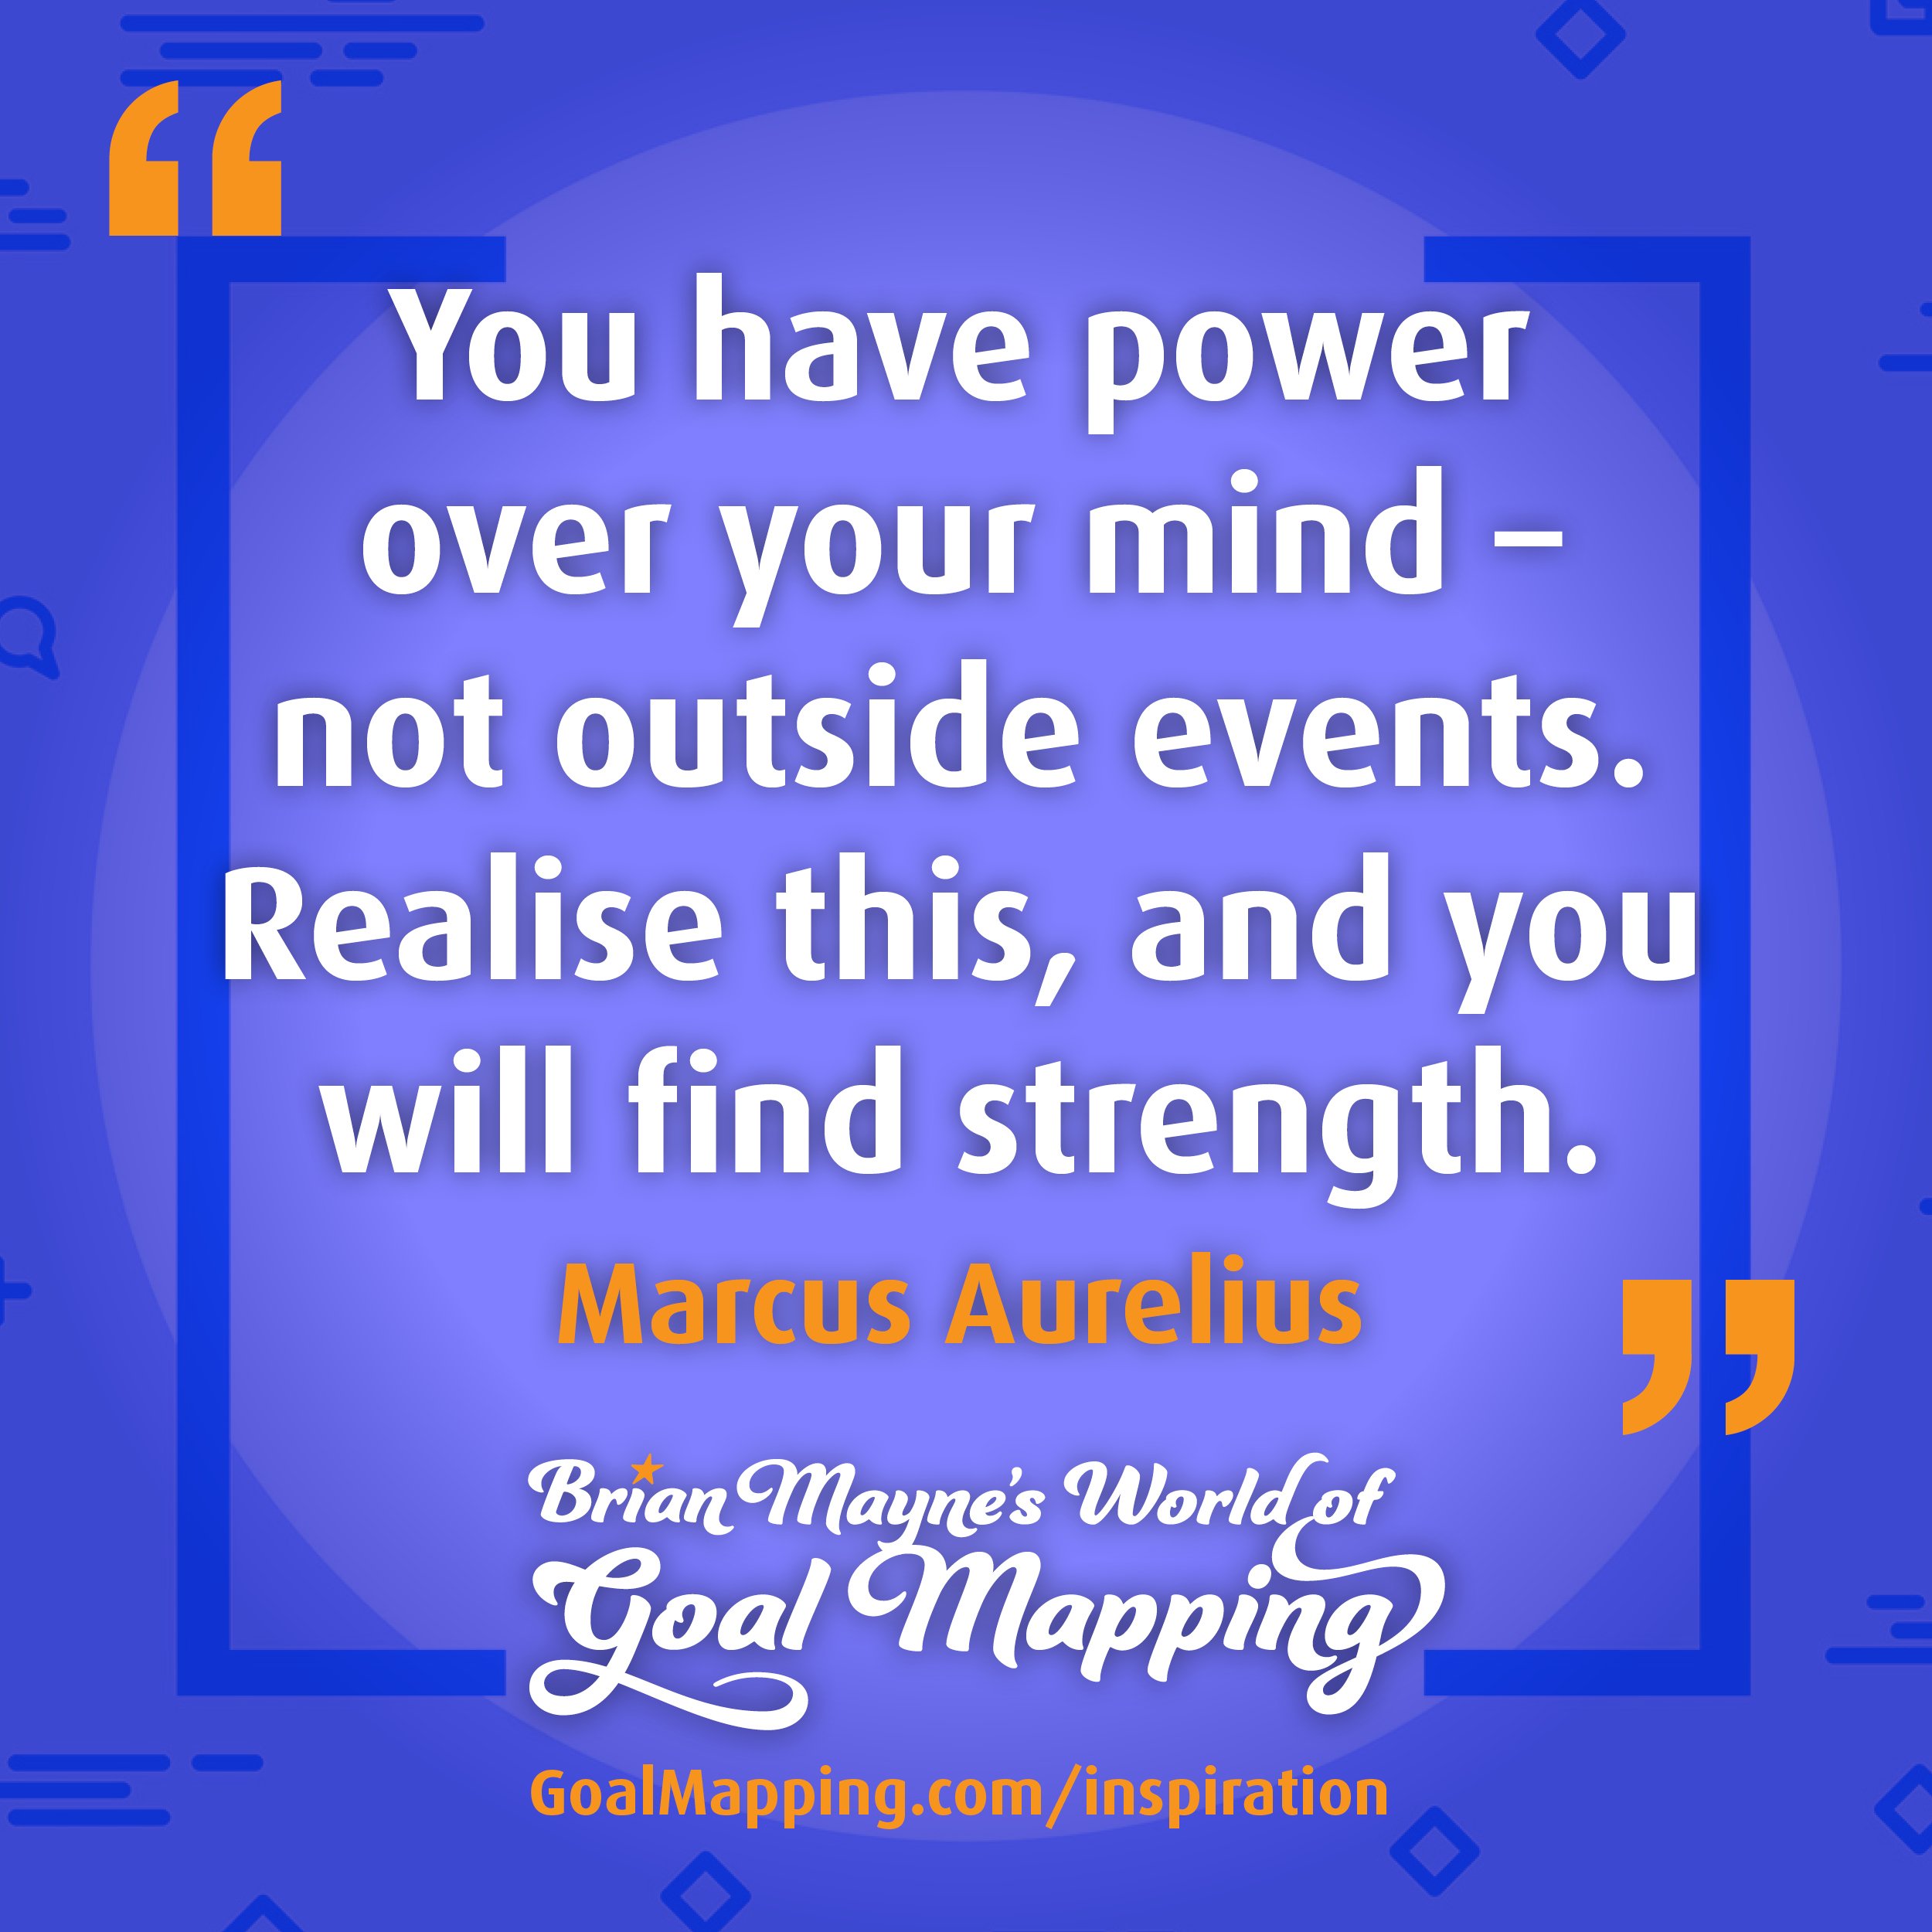 "You have power over your mind – not outside events. Realise this, and you will find strength." Marcus Aurelius